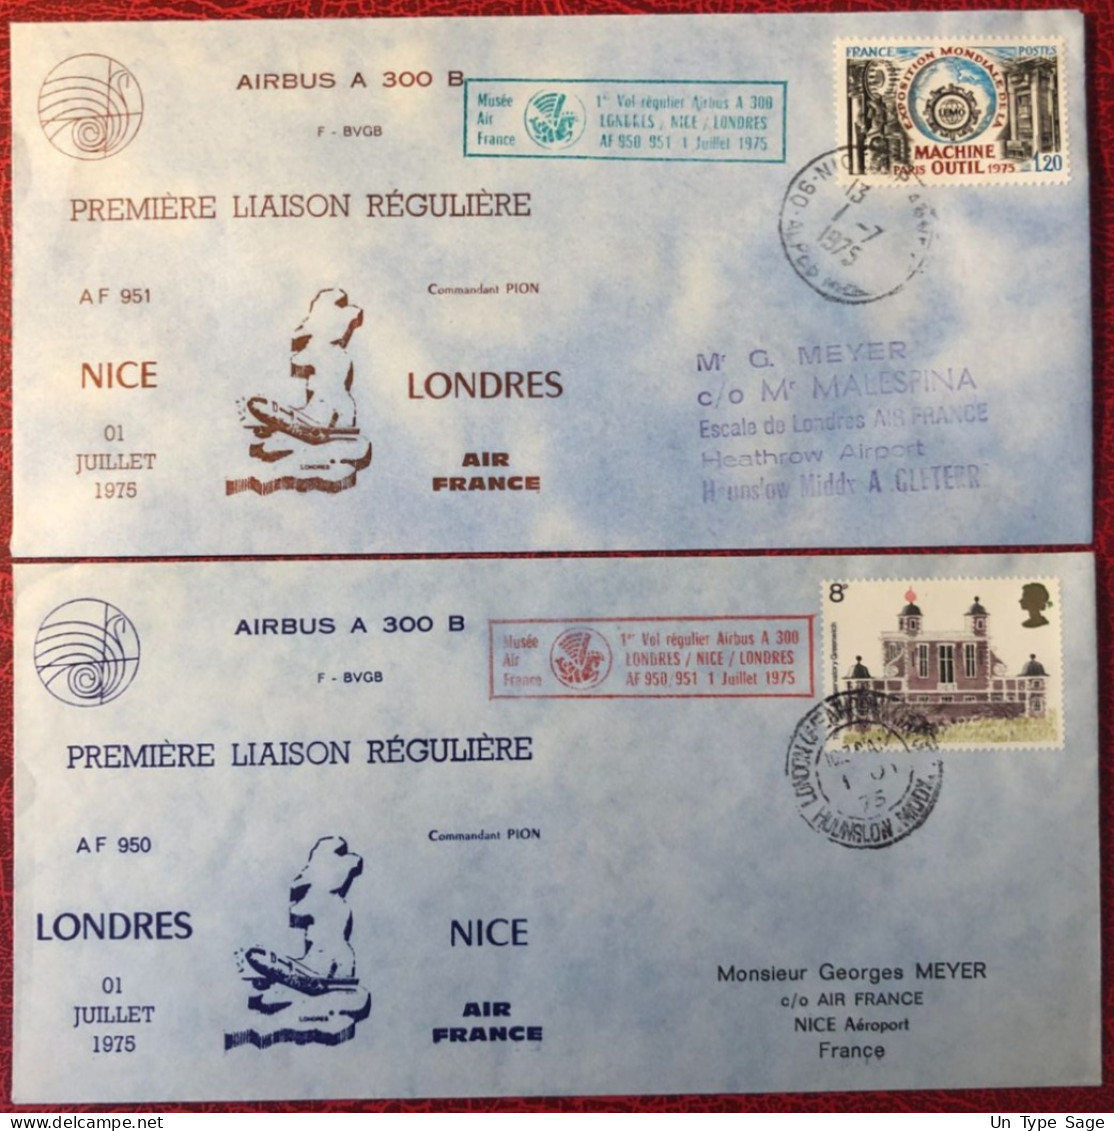 France, Premier Vol (Airbus A300) NICE / LONDRES 1.7.1975 - 2 Enveloppes - (A1498) - First Flight Covers